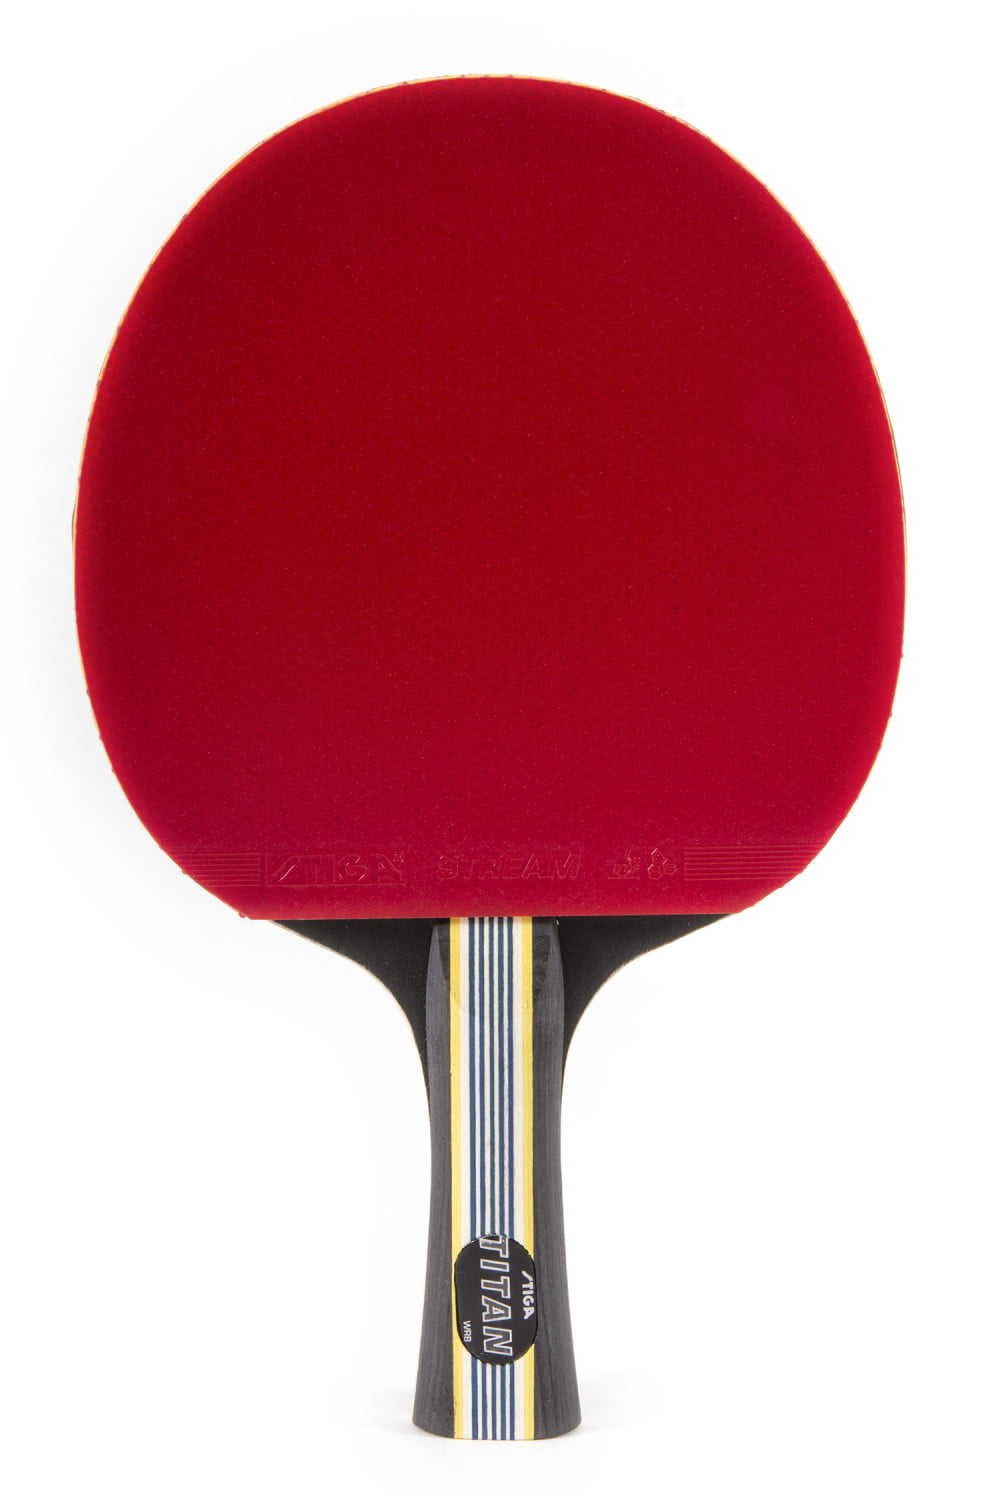 STIGA Titan Performance-Level Table Tennis Racket Made with Approved Rubber for Tournament Play